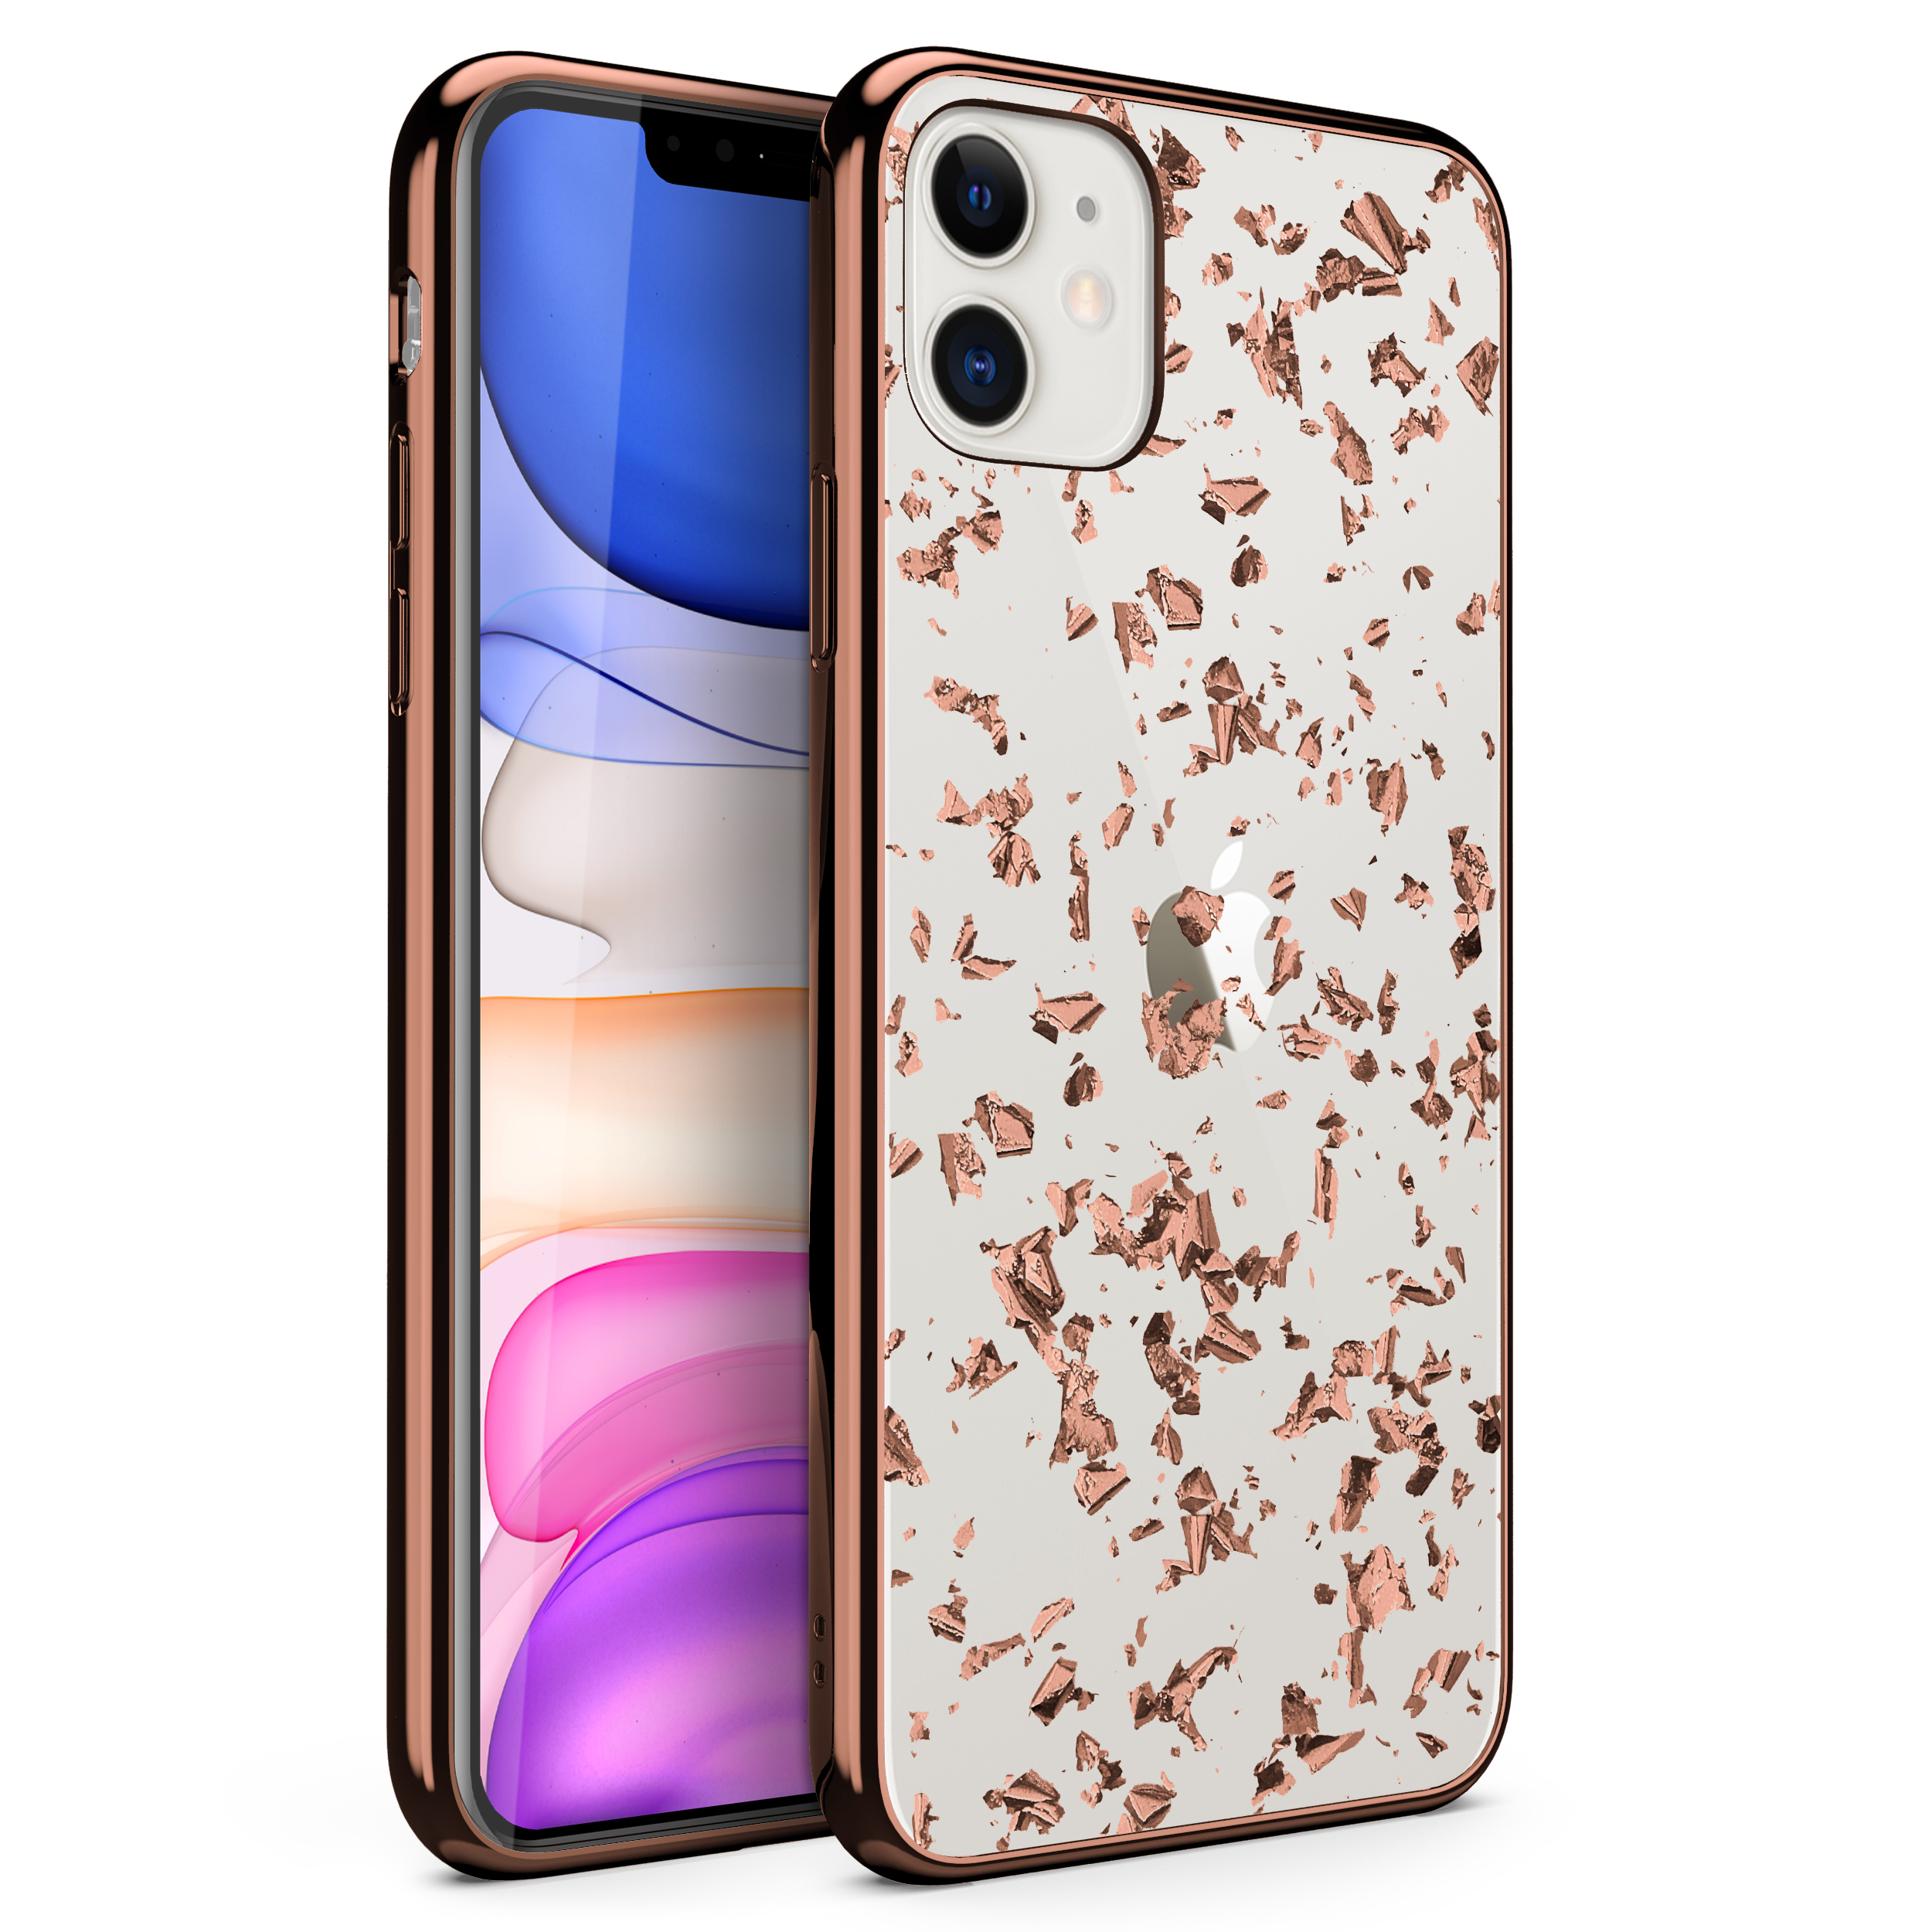 Apple iPhone 11 Case, Case Ultra Slim Thin Case Clear Transparent w/ Rose Gold Foil Flakes (Rose Gold Exposure) :: CellPhoneCases.com